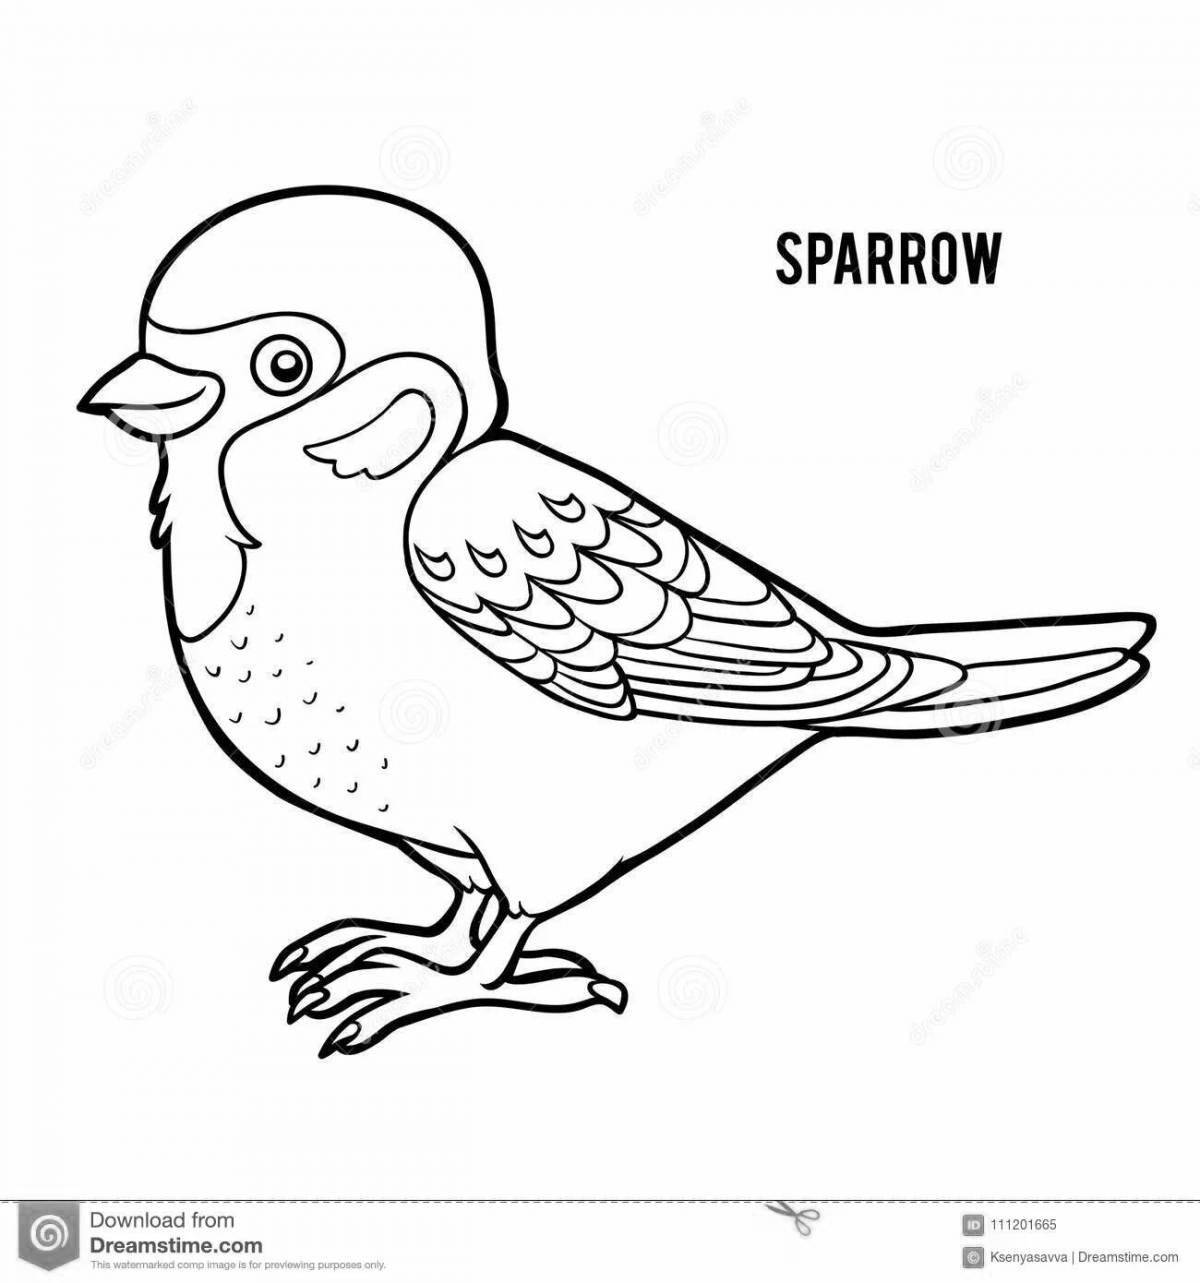 Coloring cute sparrow for kids